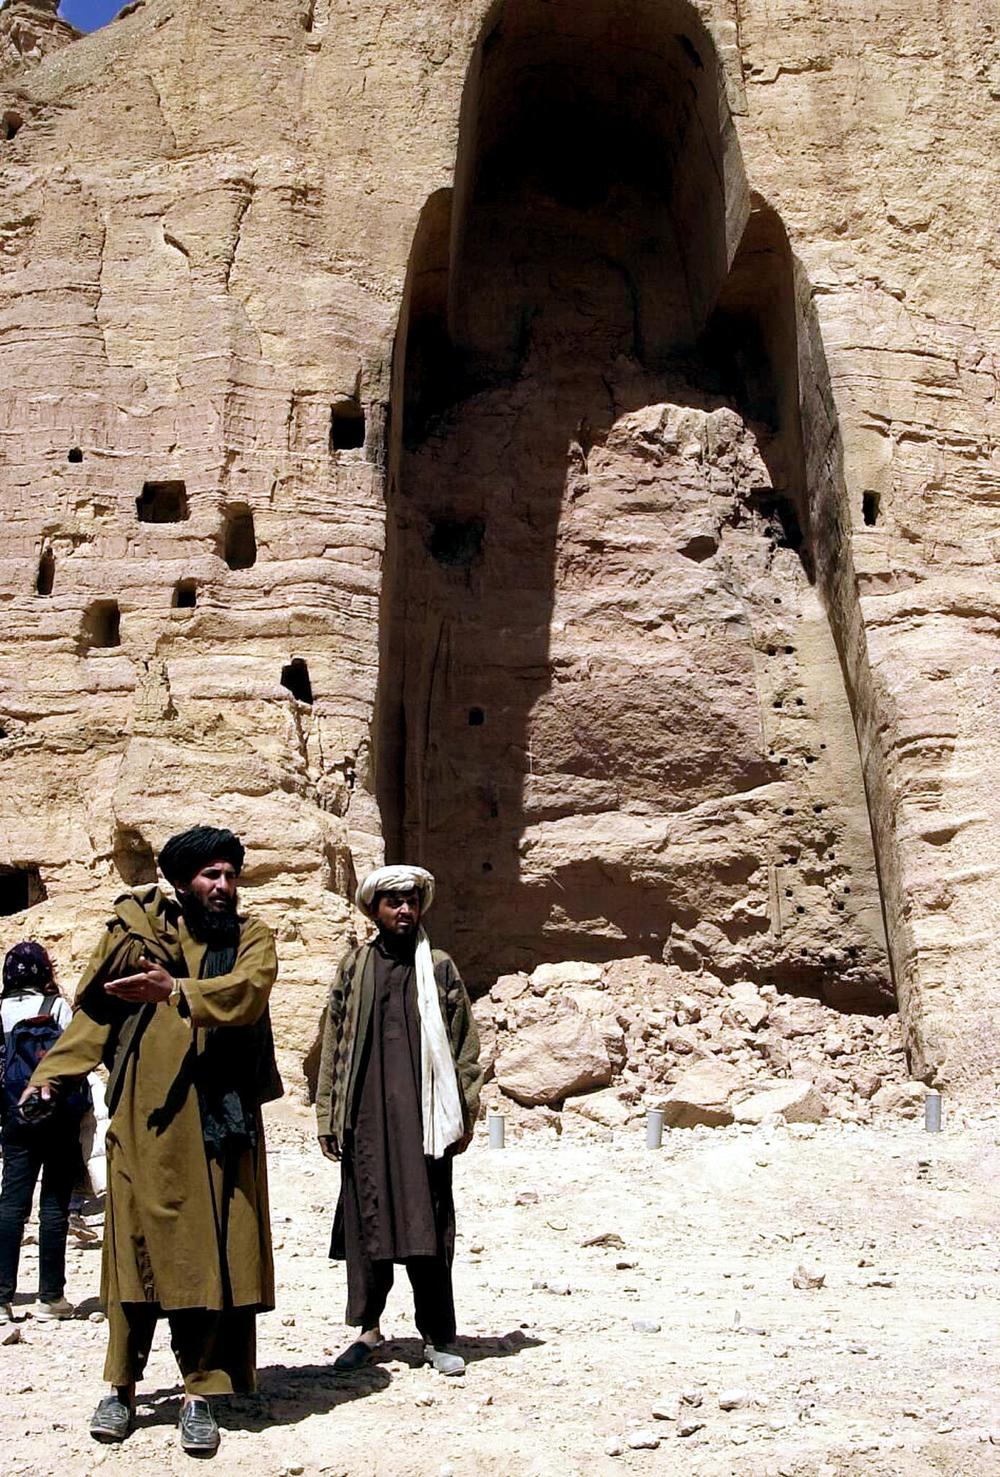 Afghan Taliban in front of the empty niche that held one of the two giant Buddha statues the Taliban blew up in Bamiyan in March 2001.